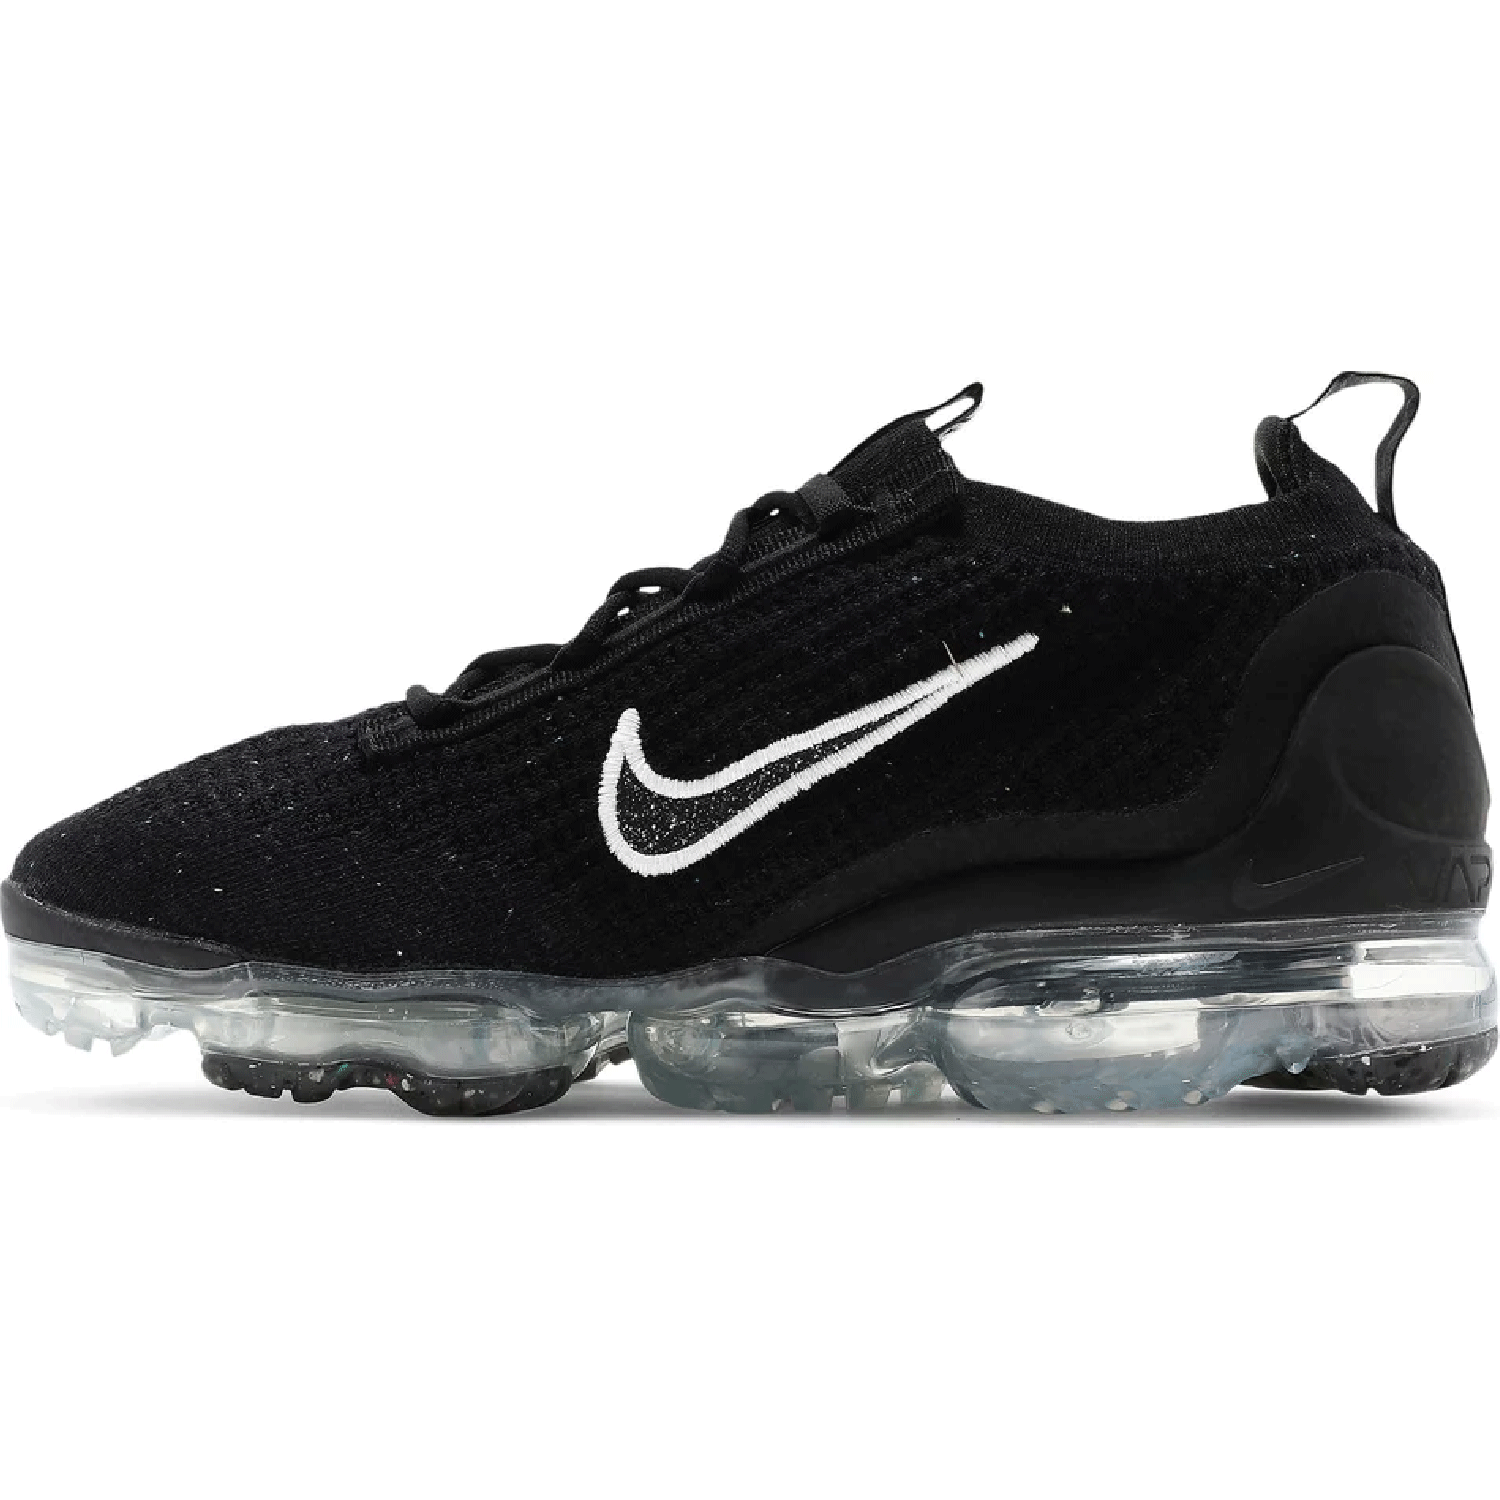 Air VaporMax 2021 Flyknit Black Speckled (Wmns) Trainers Nike 5.5 UK Black Speckled 